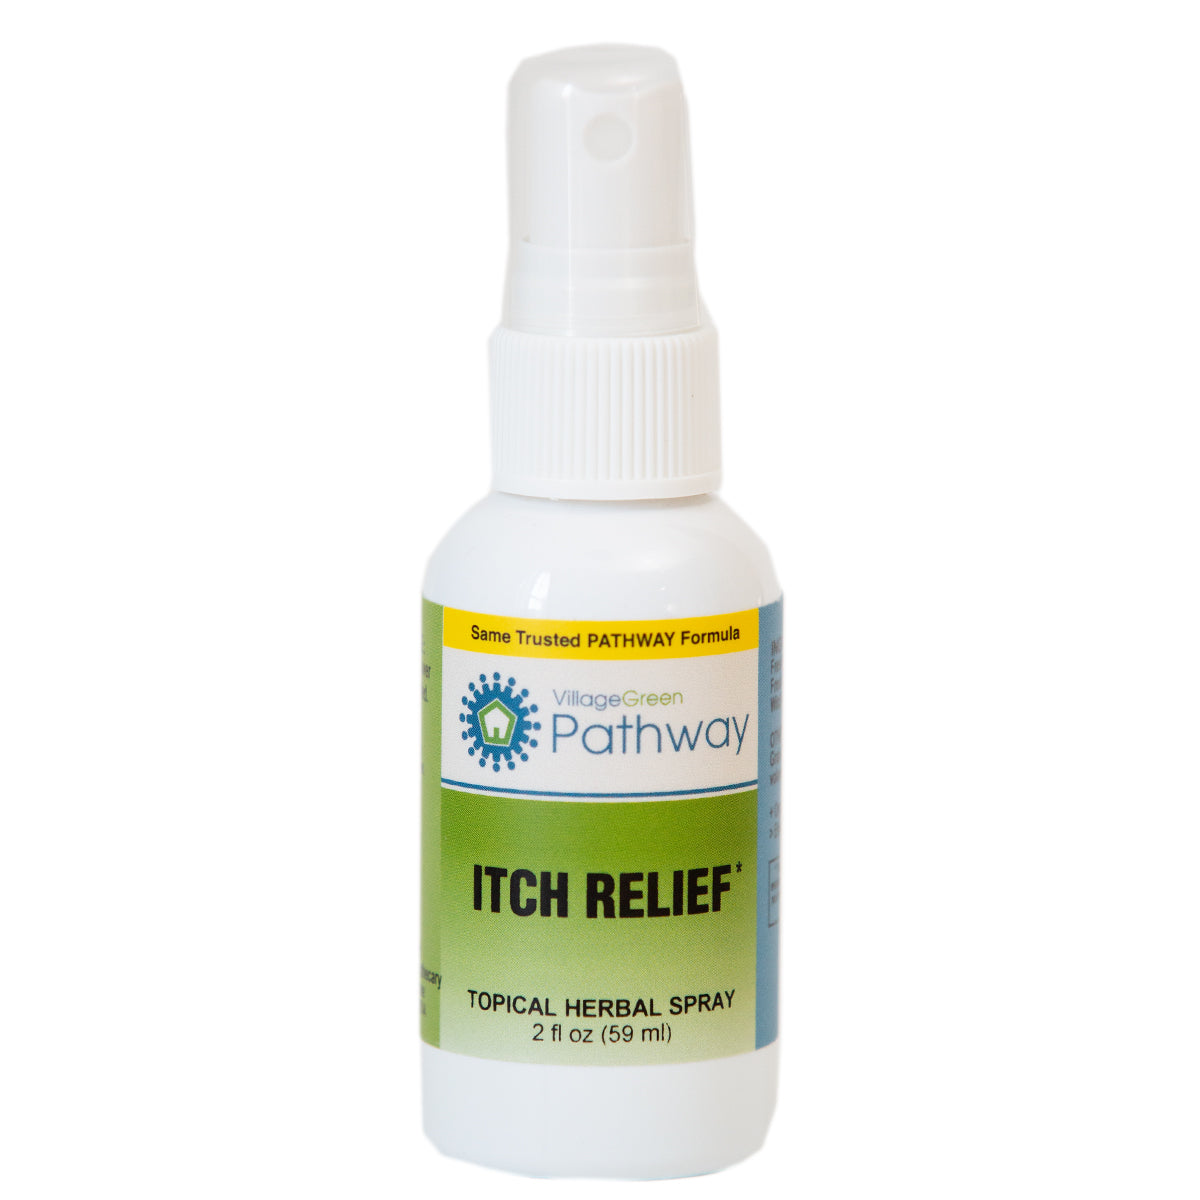 Itch Relief - My Village Green